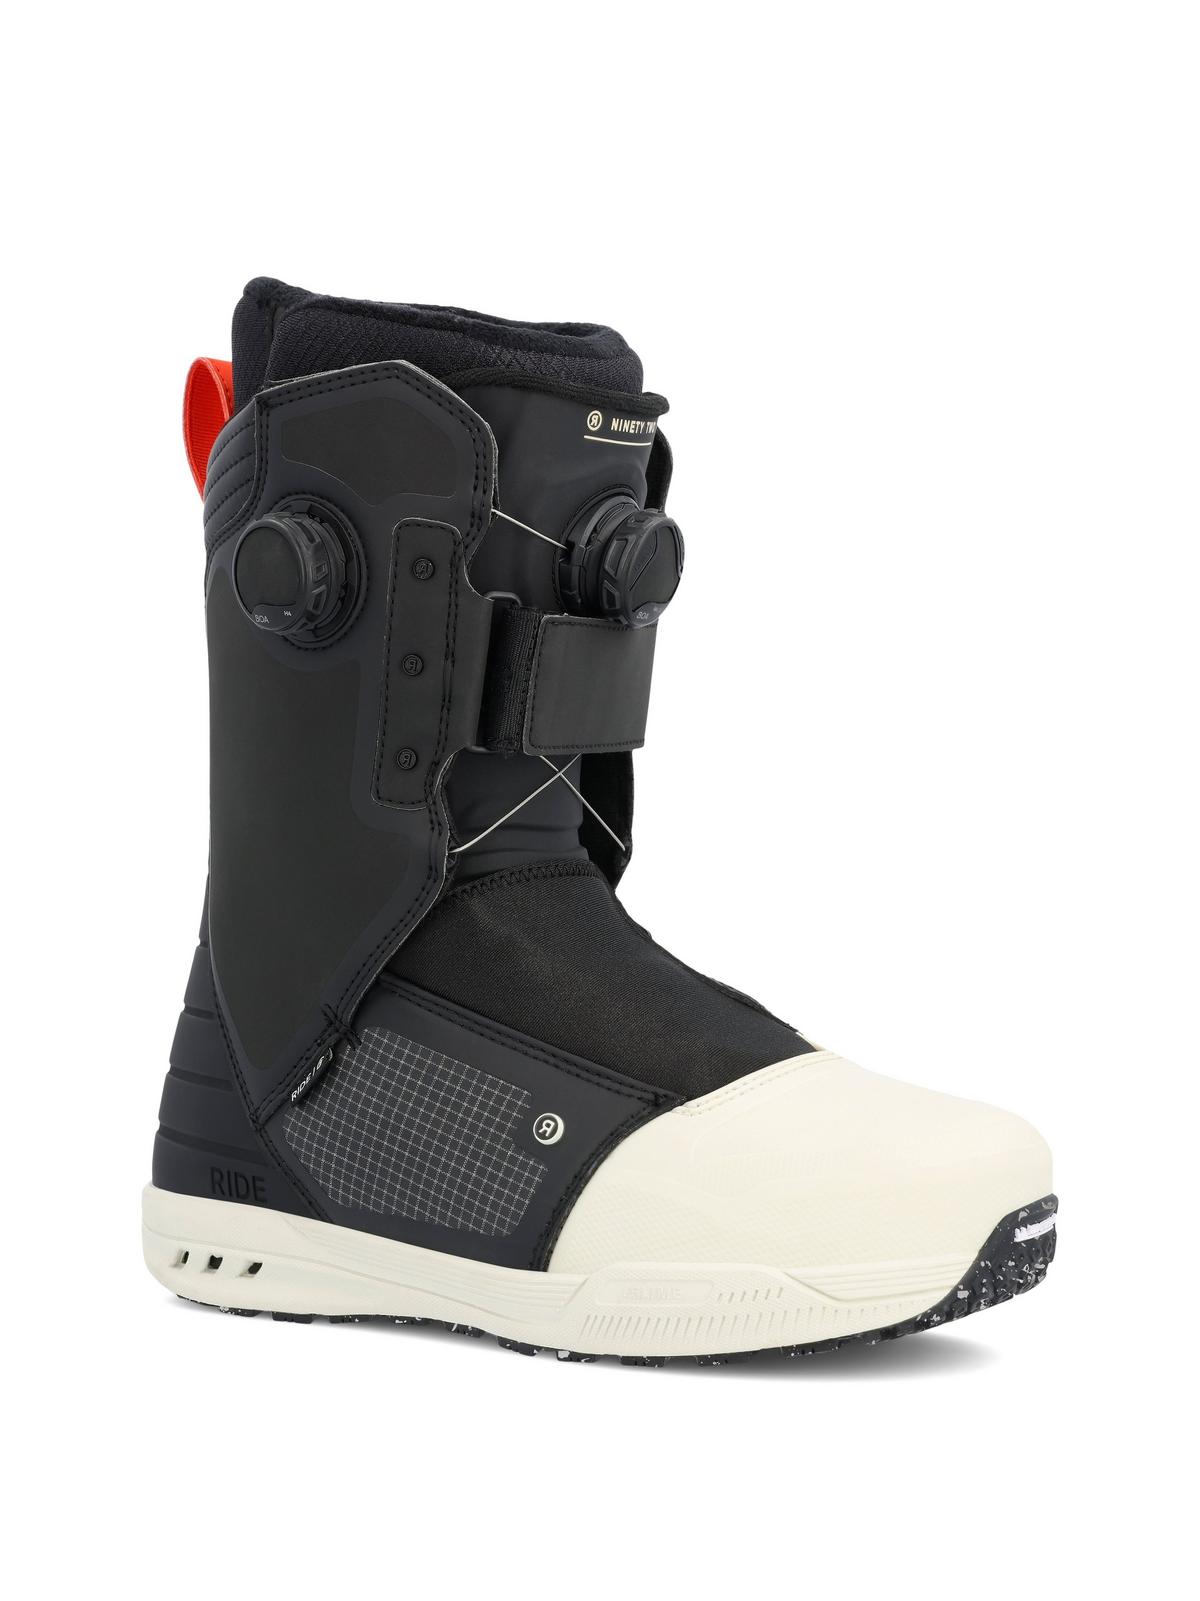 Necklet Generous Both RIDE The 92 Snowboard Boots 2023 | RIDE Snowboards